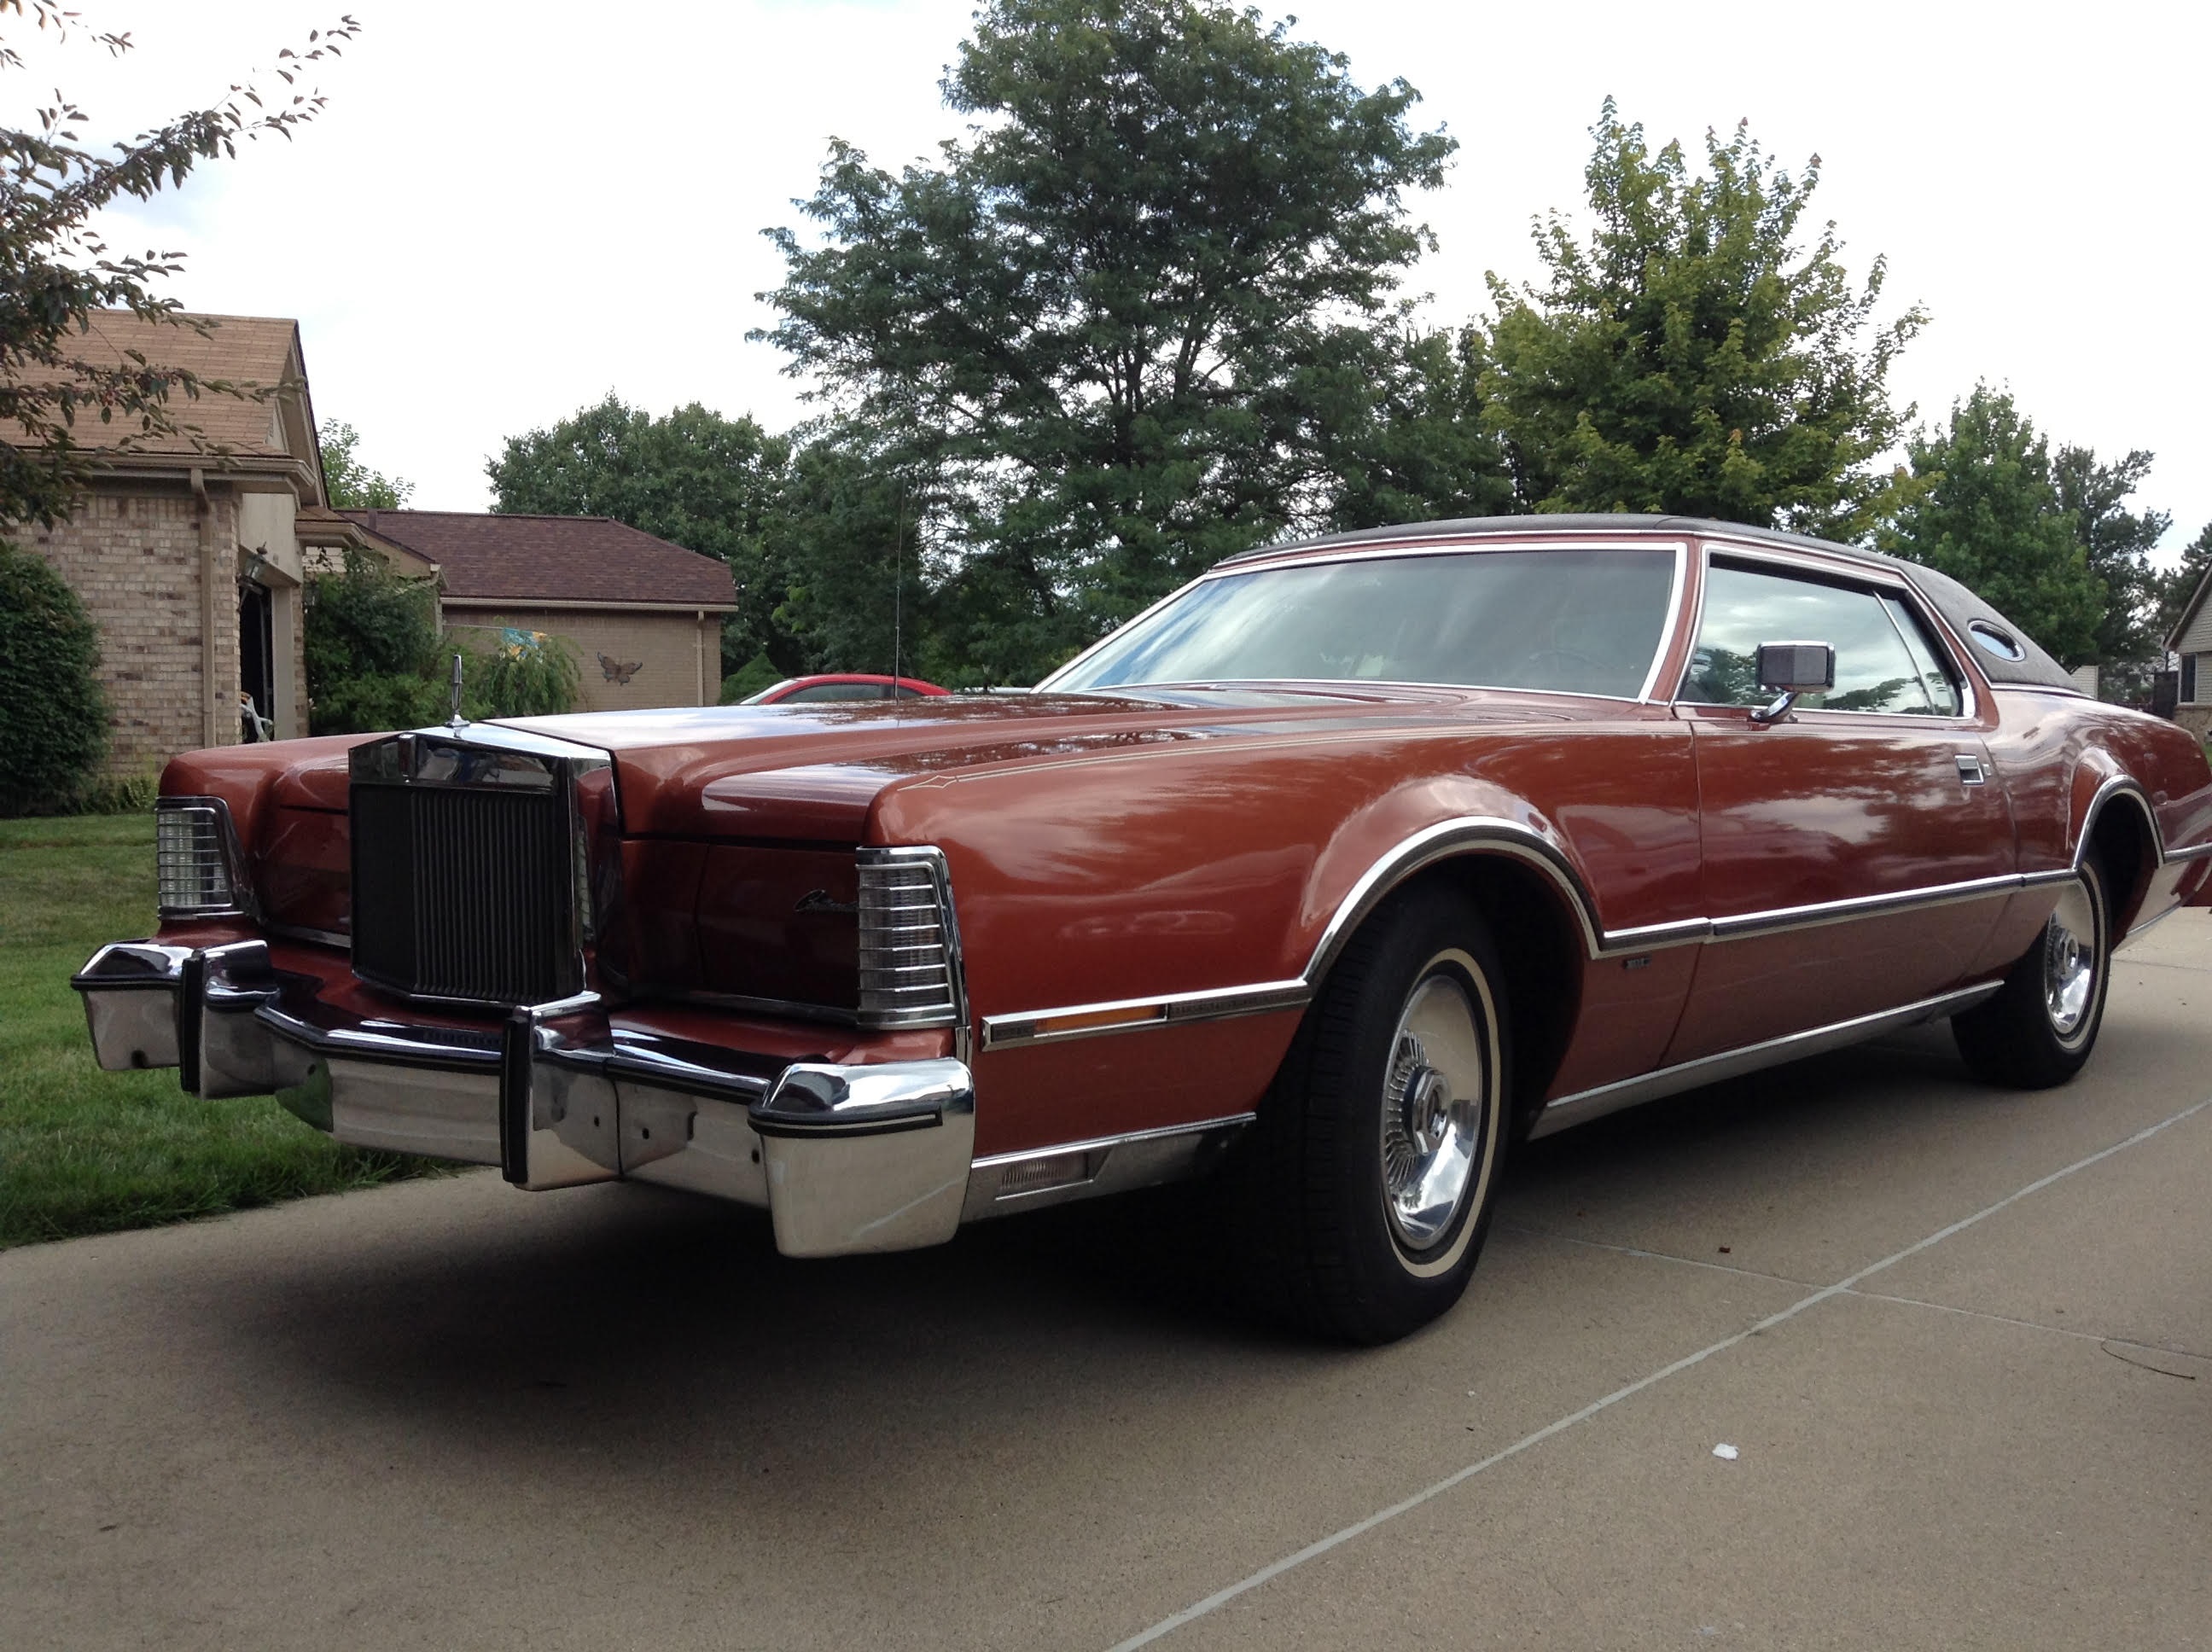 1976 Lincoln Continental Mark IV Donated to Habitat for Humanity